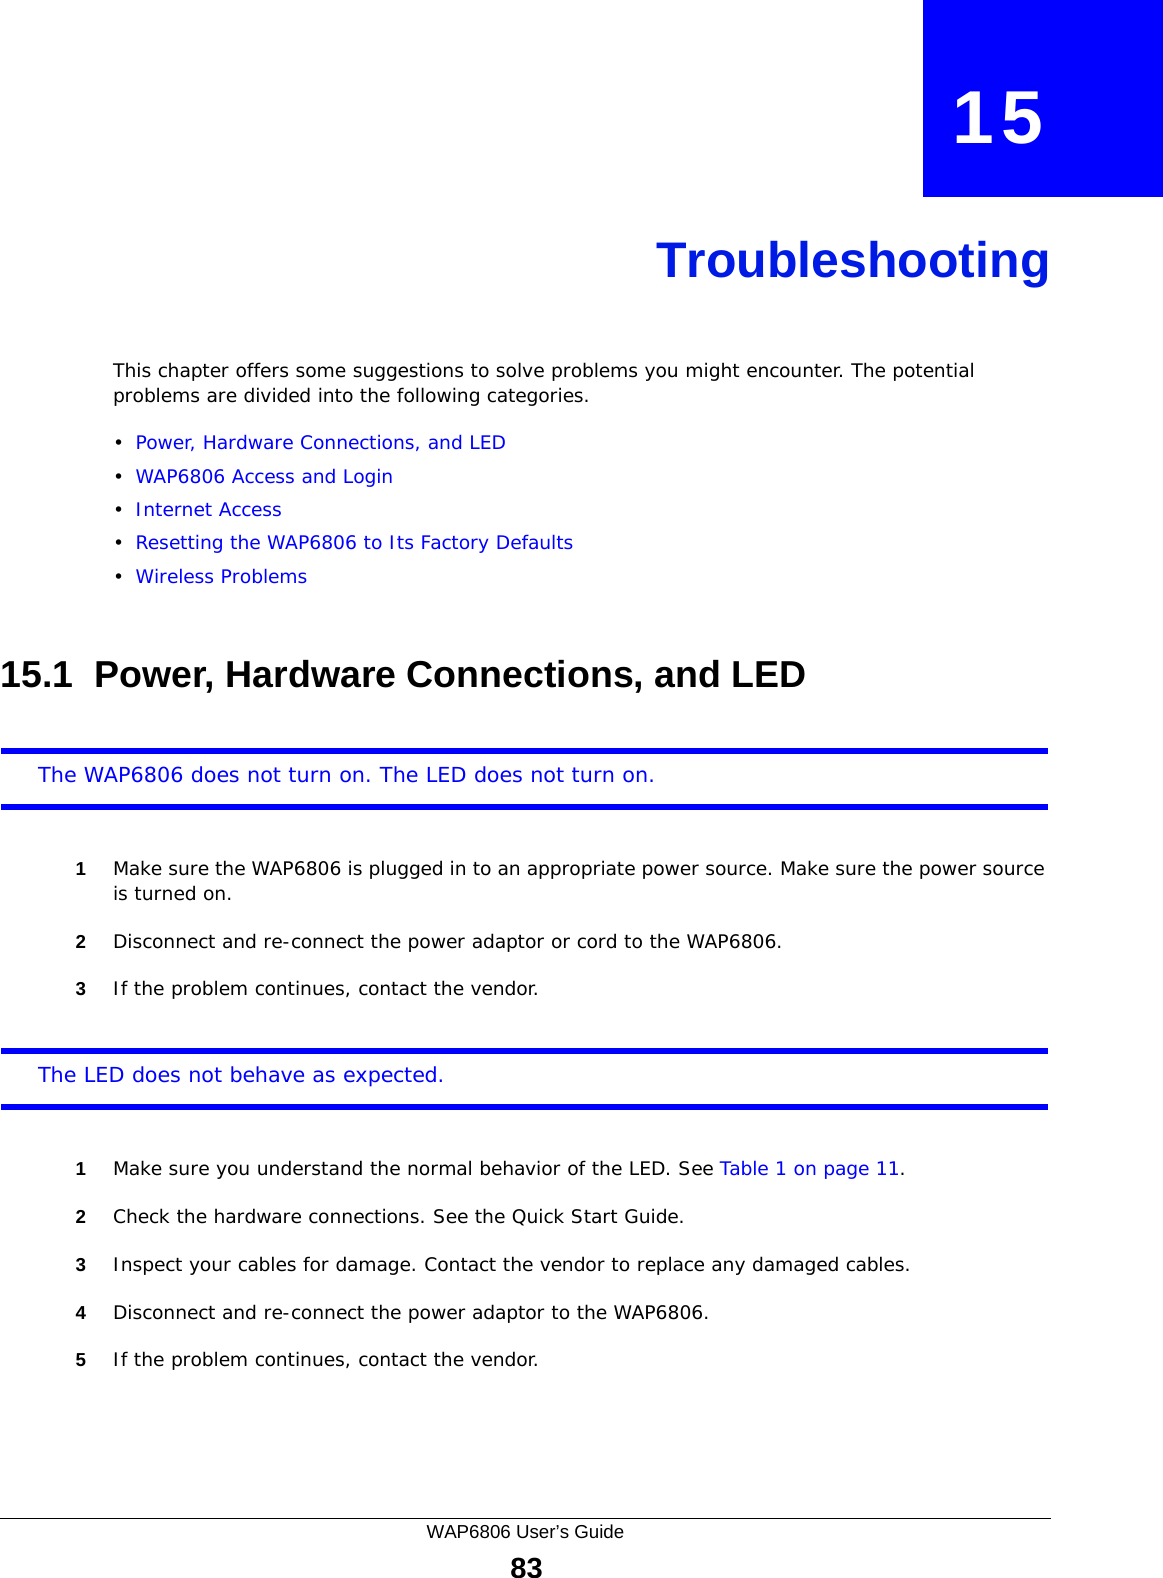 WAP6806 User’s Guide83CHAPTER   15TroubleshootingThis chapter offers some suggestions to solve problems you might encounter. The potential problems are divided into the following categories. •Power, Hardware Connections, and LED•WAP6806 Access and Login•Internet Access•Resetting the WAP6806 to Its Factory Defaults•Wireless Problems15.1  Power, Hardware Connections, and LEDThe WAP6806 does not turn on. The LED does not turn on.1Make sure the WAP6806 is plugged in to an appropriate power source. Make sure the power source is turned on.2Disconnect and re-connect the power adaptor or cord to the WAP6806.3If the problem continues, contact the vendor.The LED does not behave as expected.1Make sure you understand the normal behavior of the LED. See Table 1 on page 11.2Check the hardware connections. See the Quick Start Guide. 3Inspect your cables for damage. Contact the vendor to replace any damaged cables.4Disconnect and re-connect the power adaptor to the WAP6806. 5If the problem continues, contact the vendor.